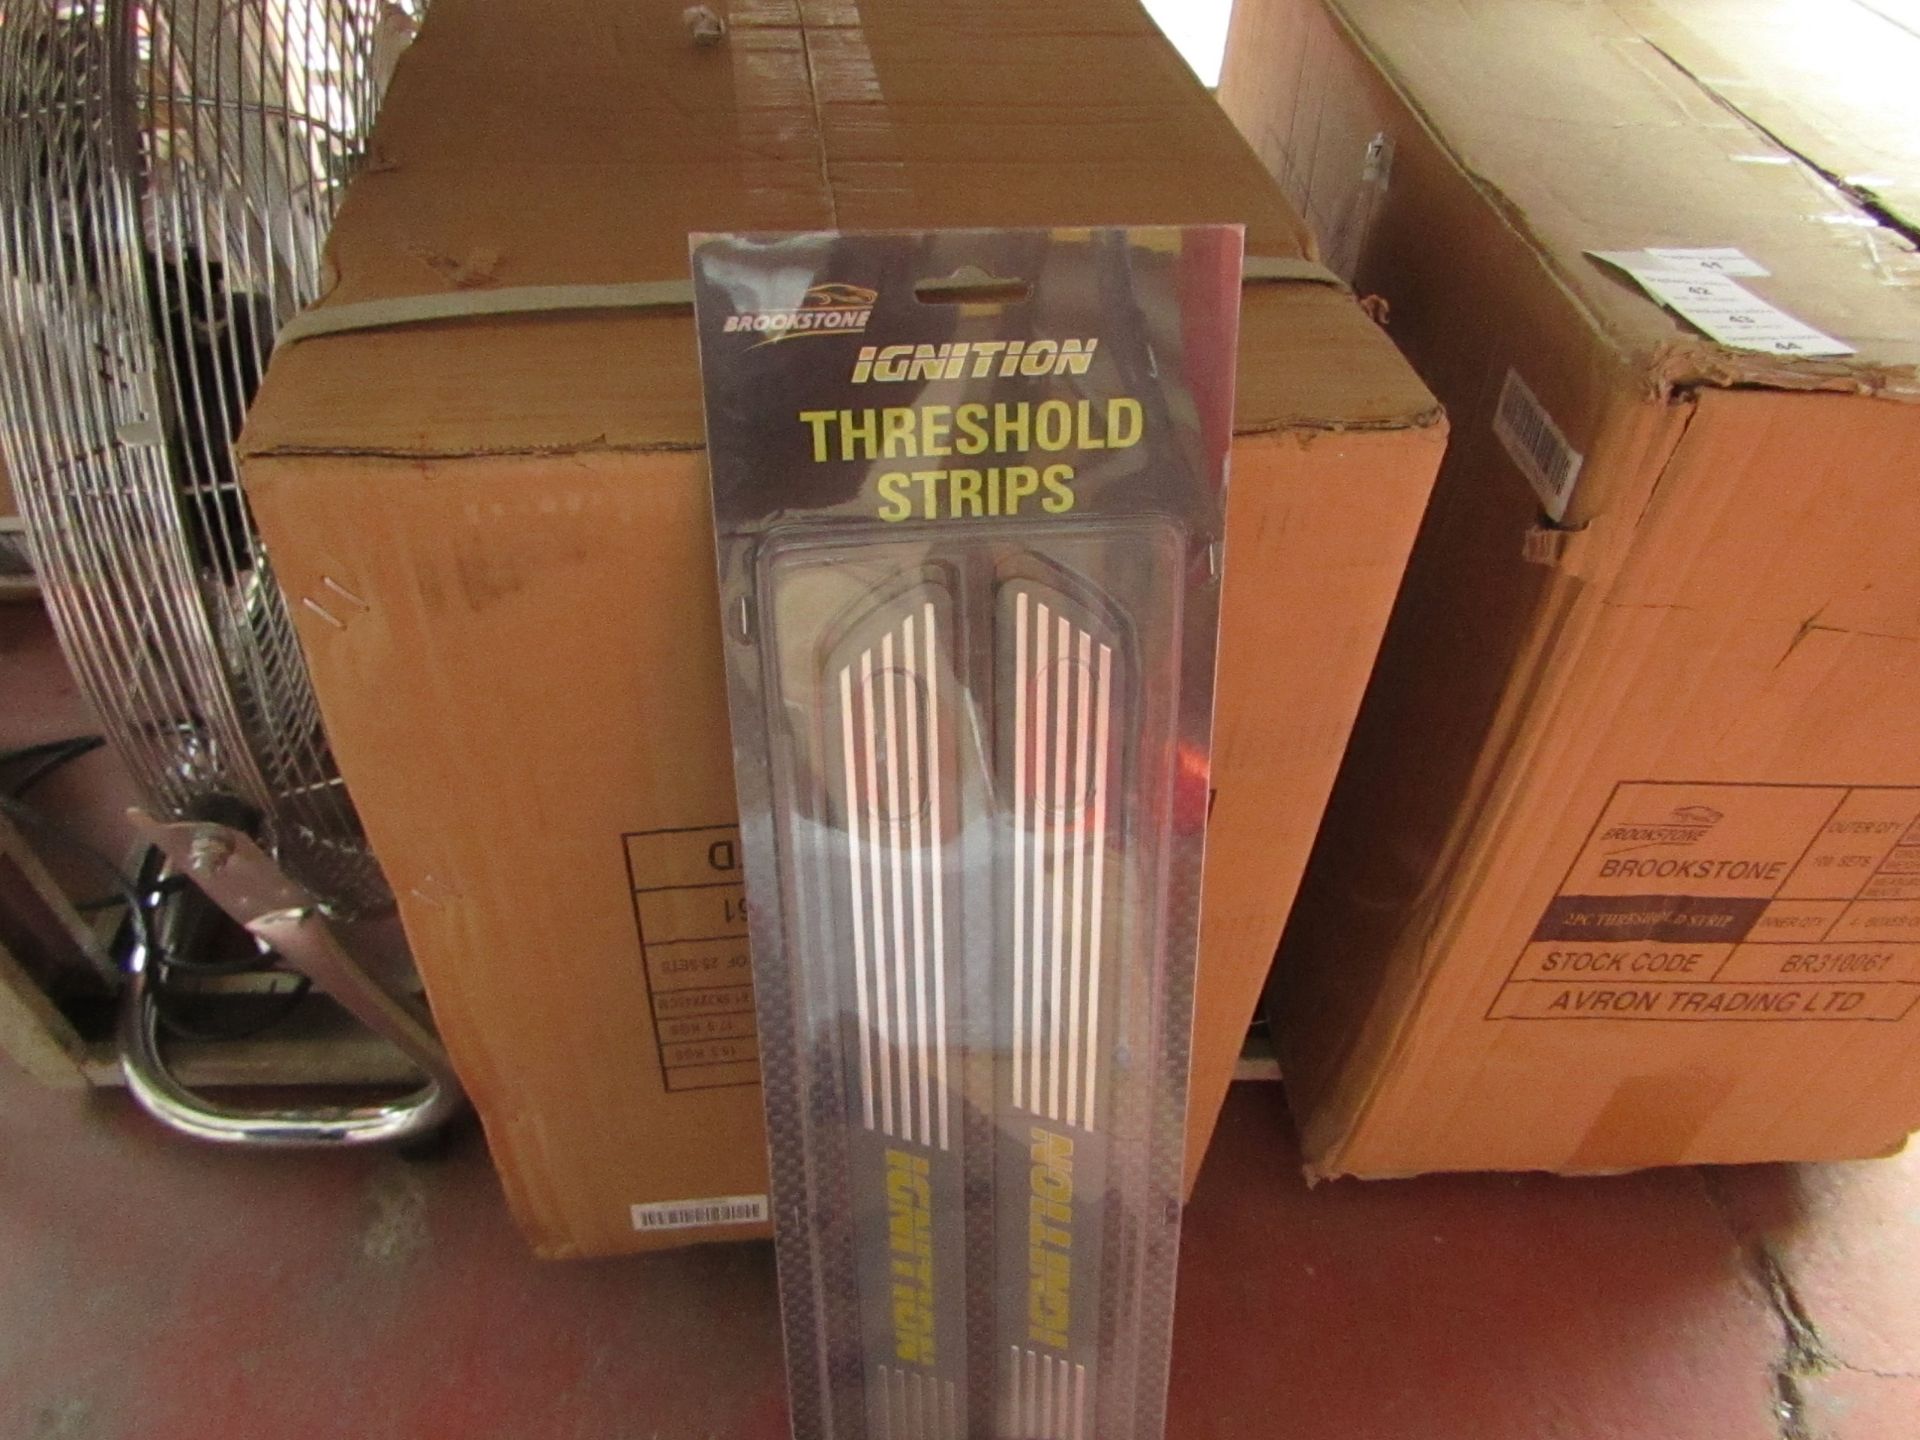 25x Brookstone - Ignition - Threshold strips - Packaged.